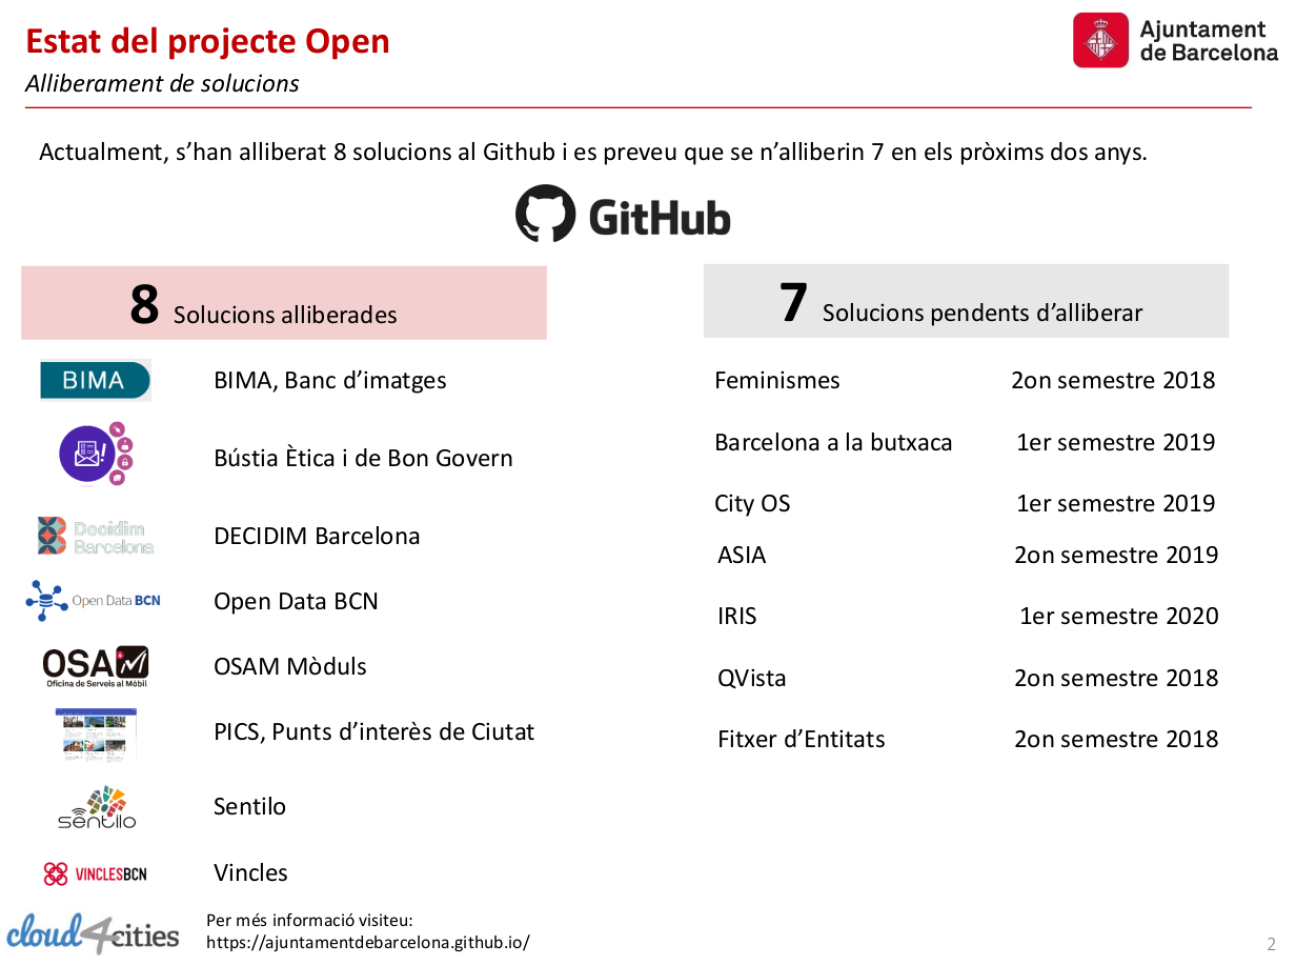 The slide show the list of solutions already on Barcelona's GitHub page, and those that will soon be added.